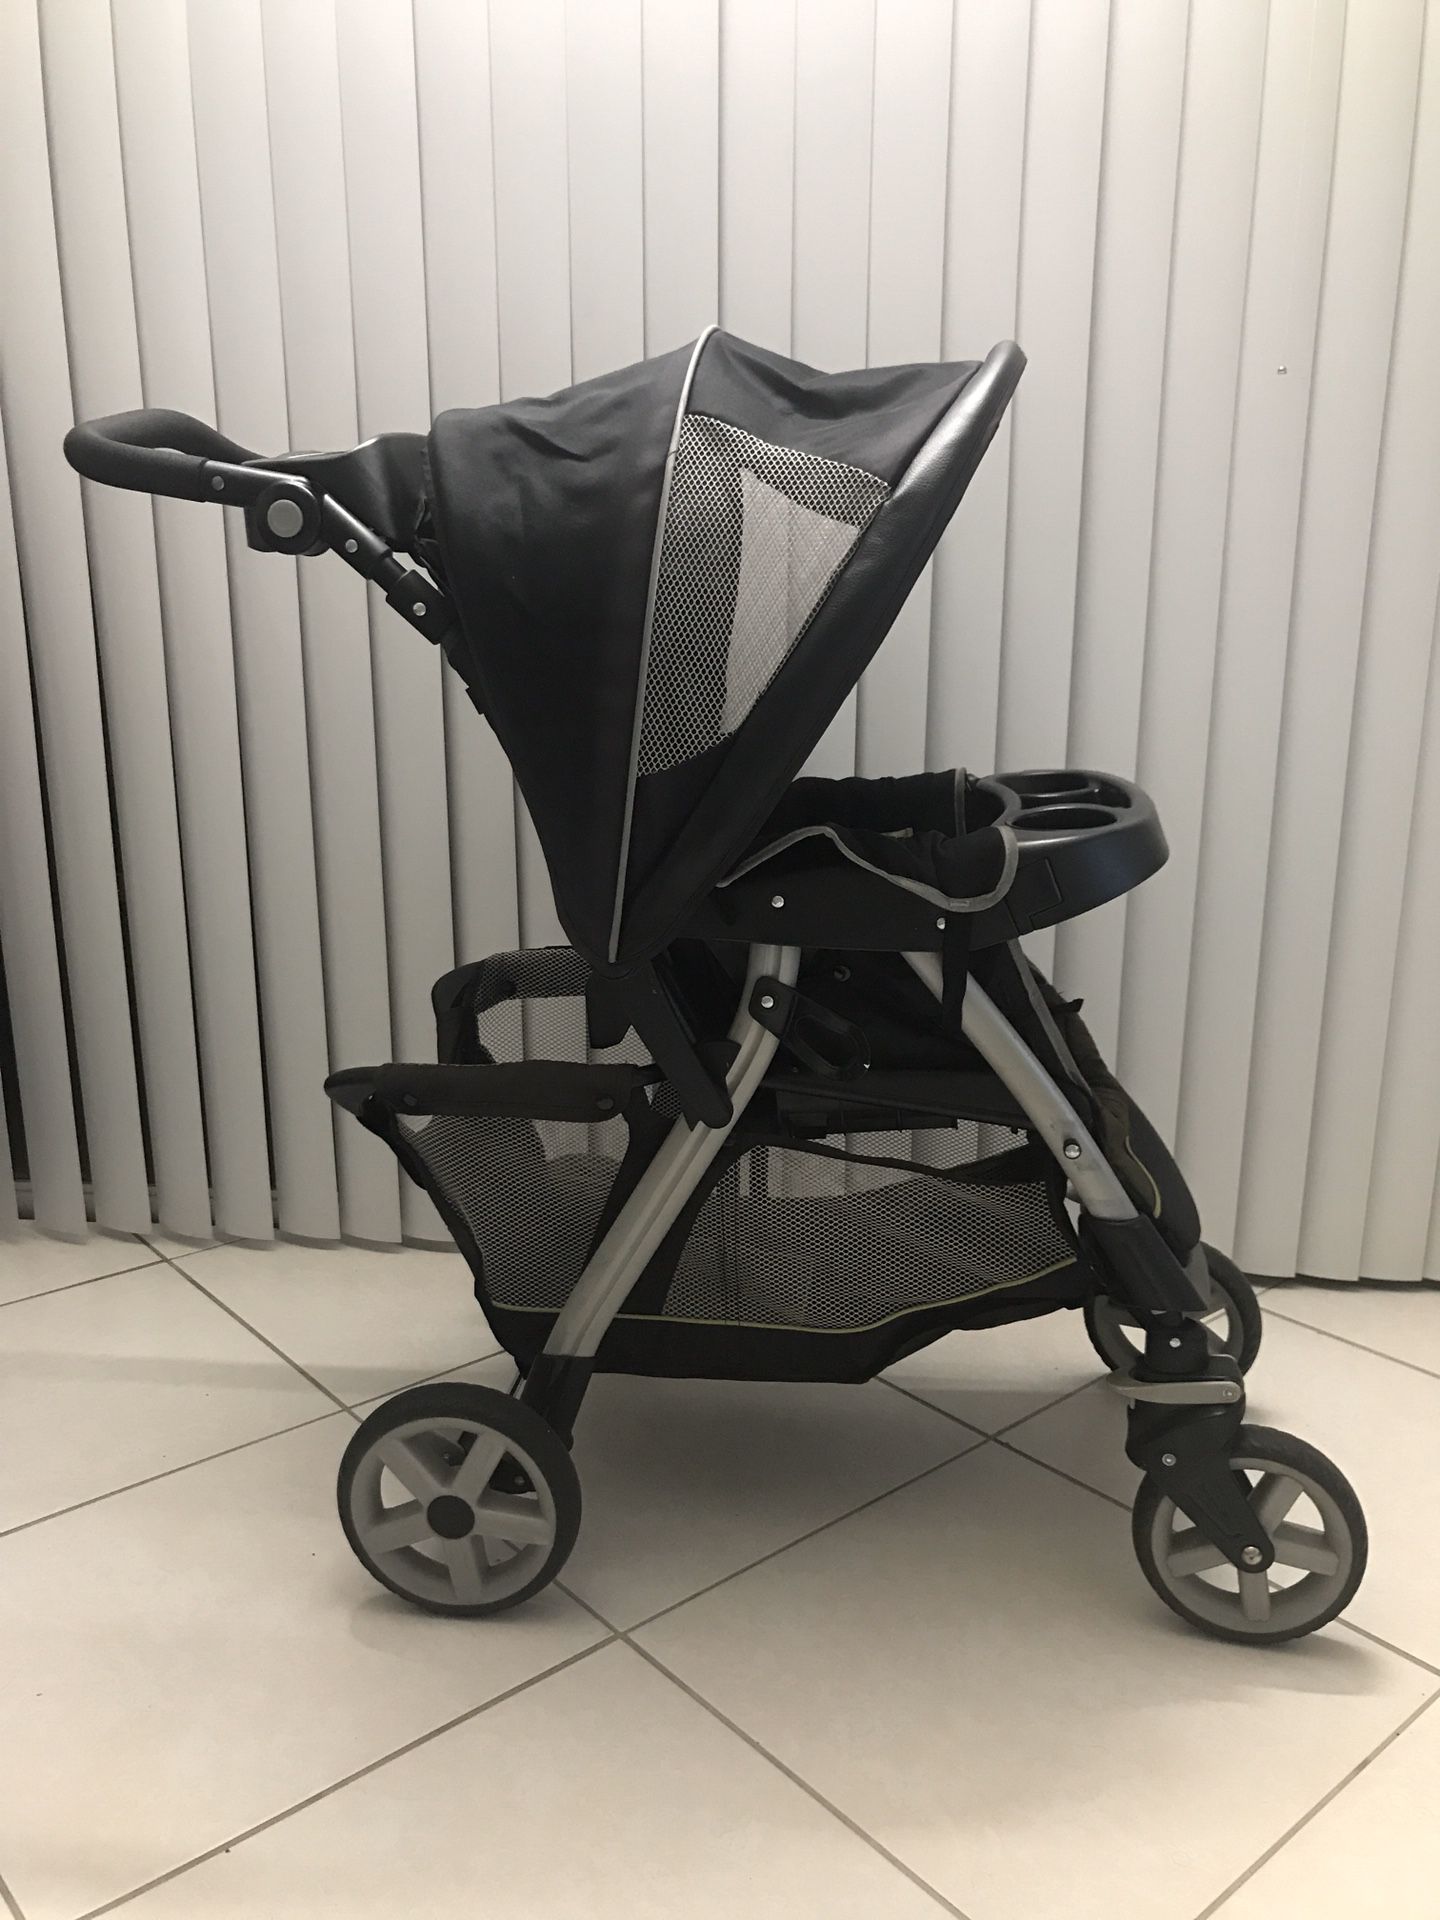 Graco stroller and car seat base